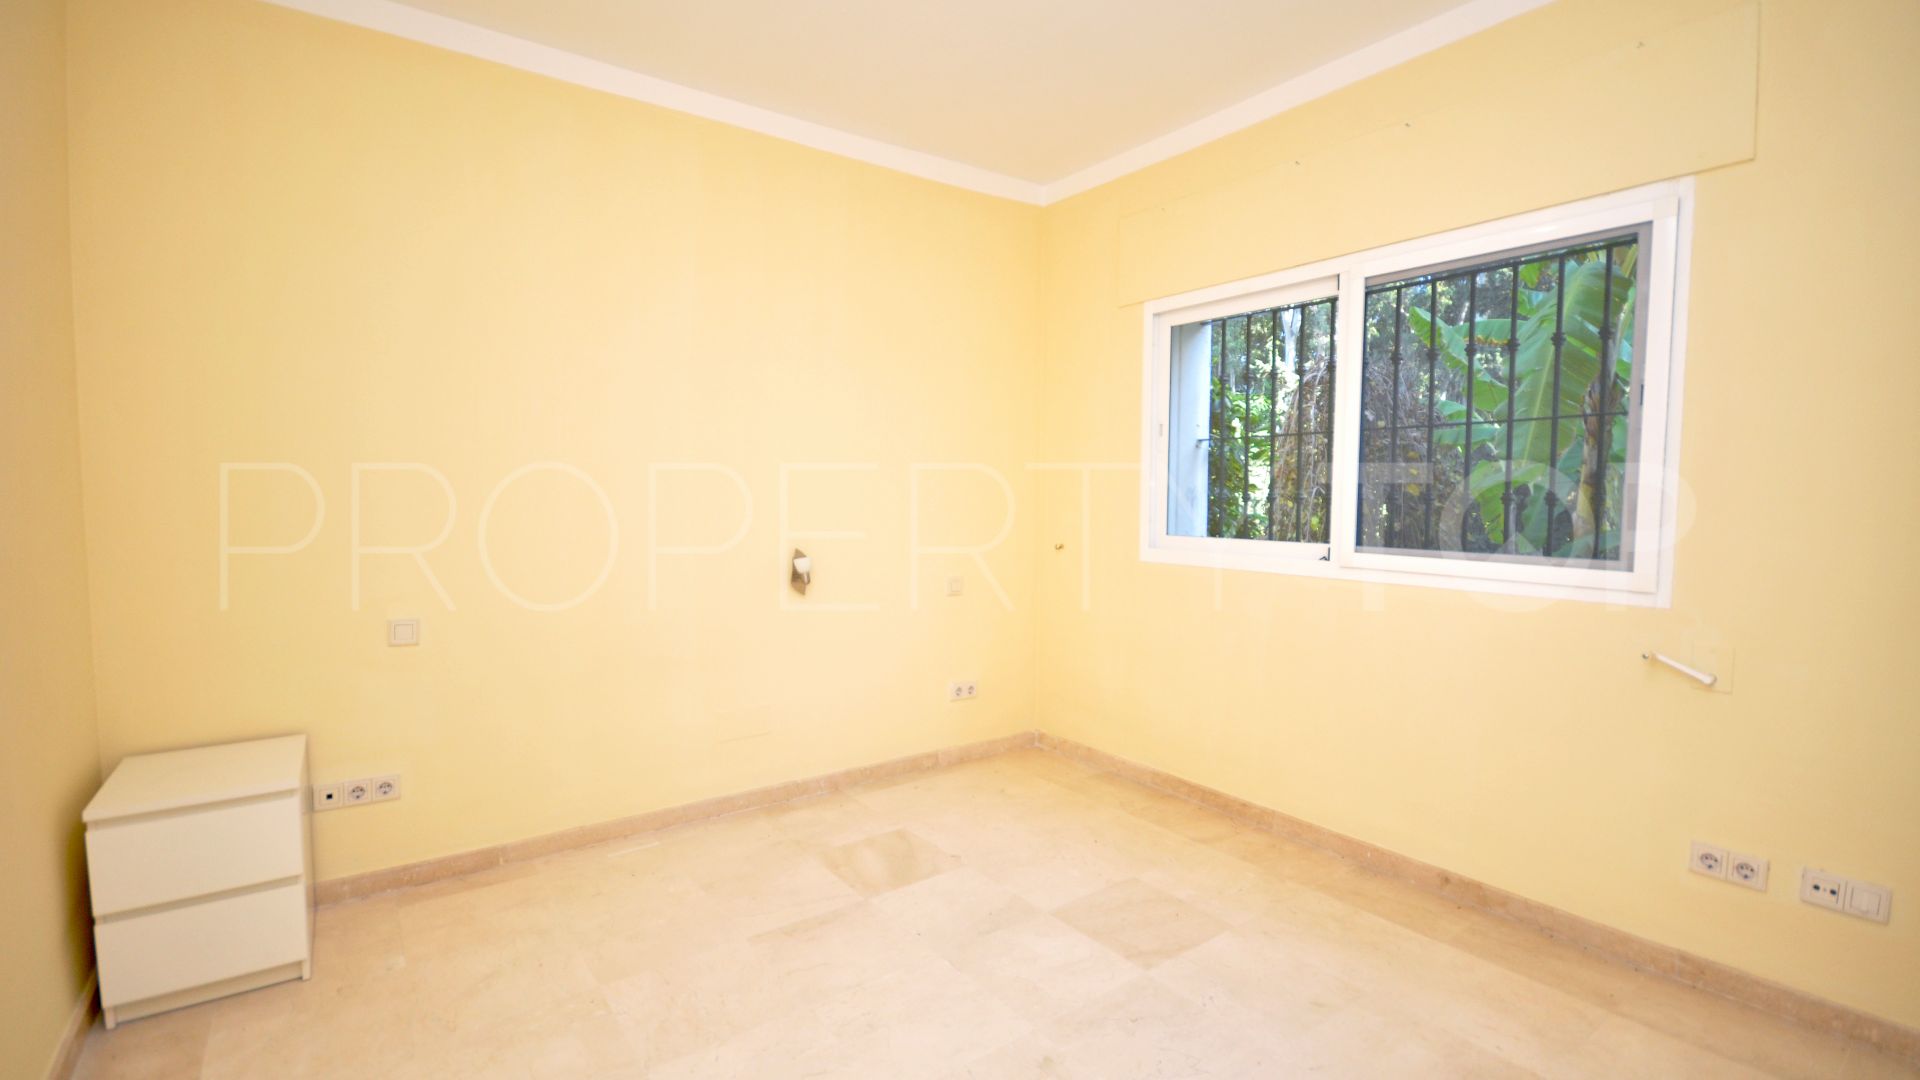 Ground floor apartment with 3 bedrooms for sale in Park Beach